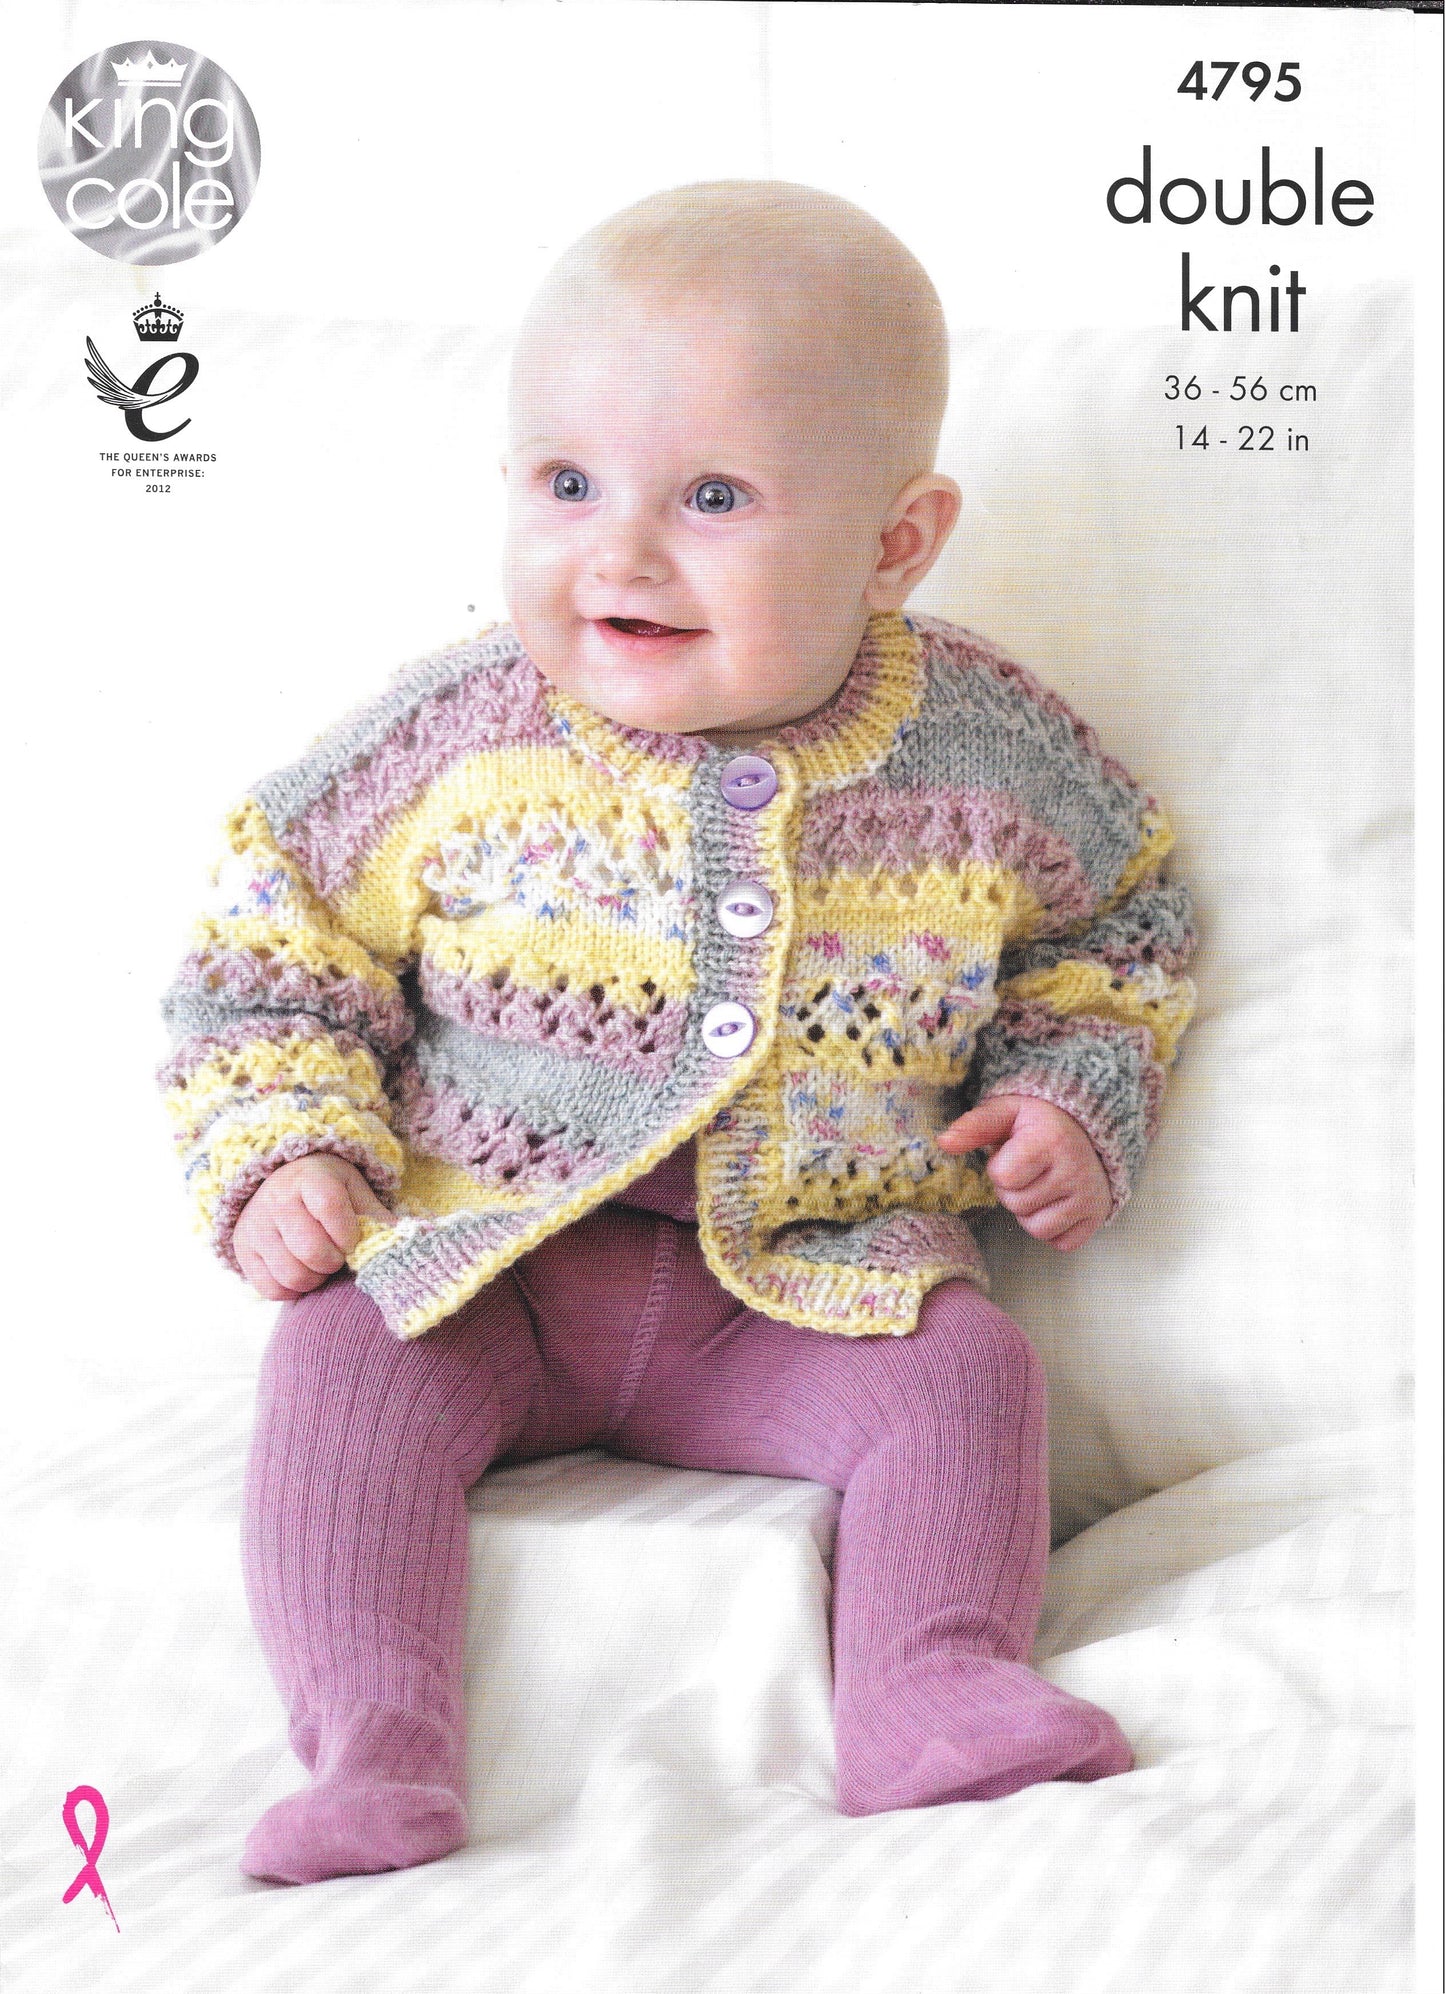 4795 King Cole Double Knit Baby Cardigans, Hat and Blanket knitting pattern